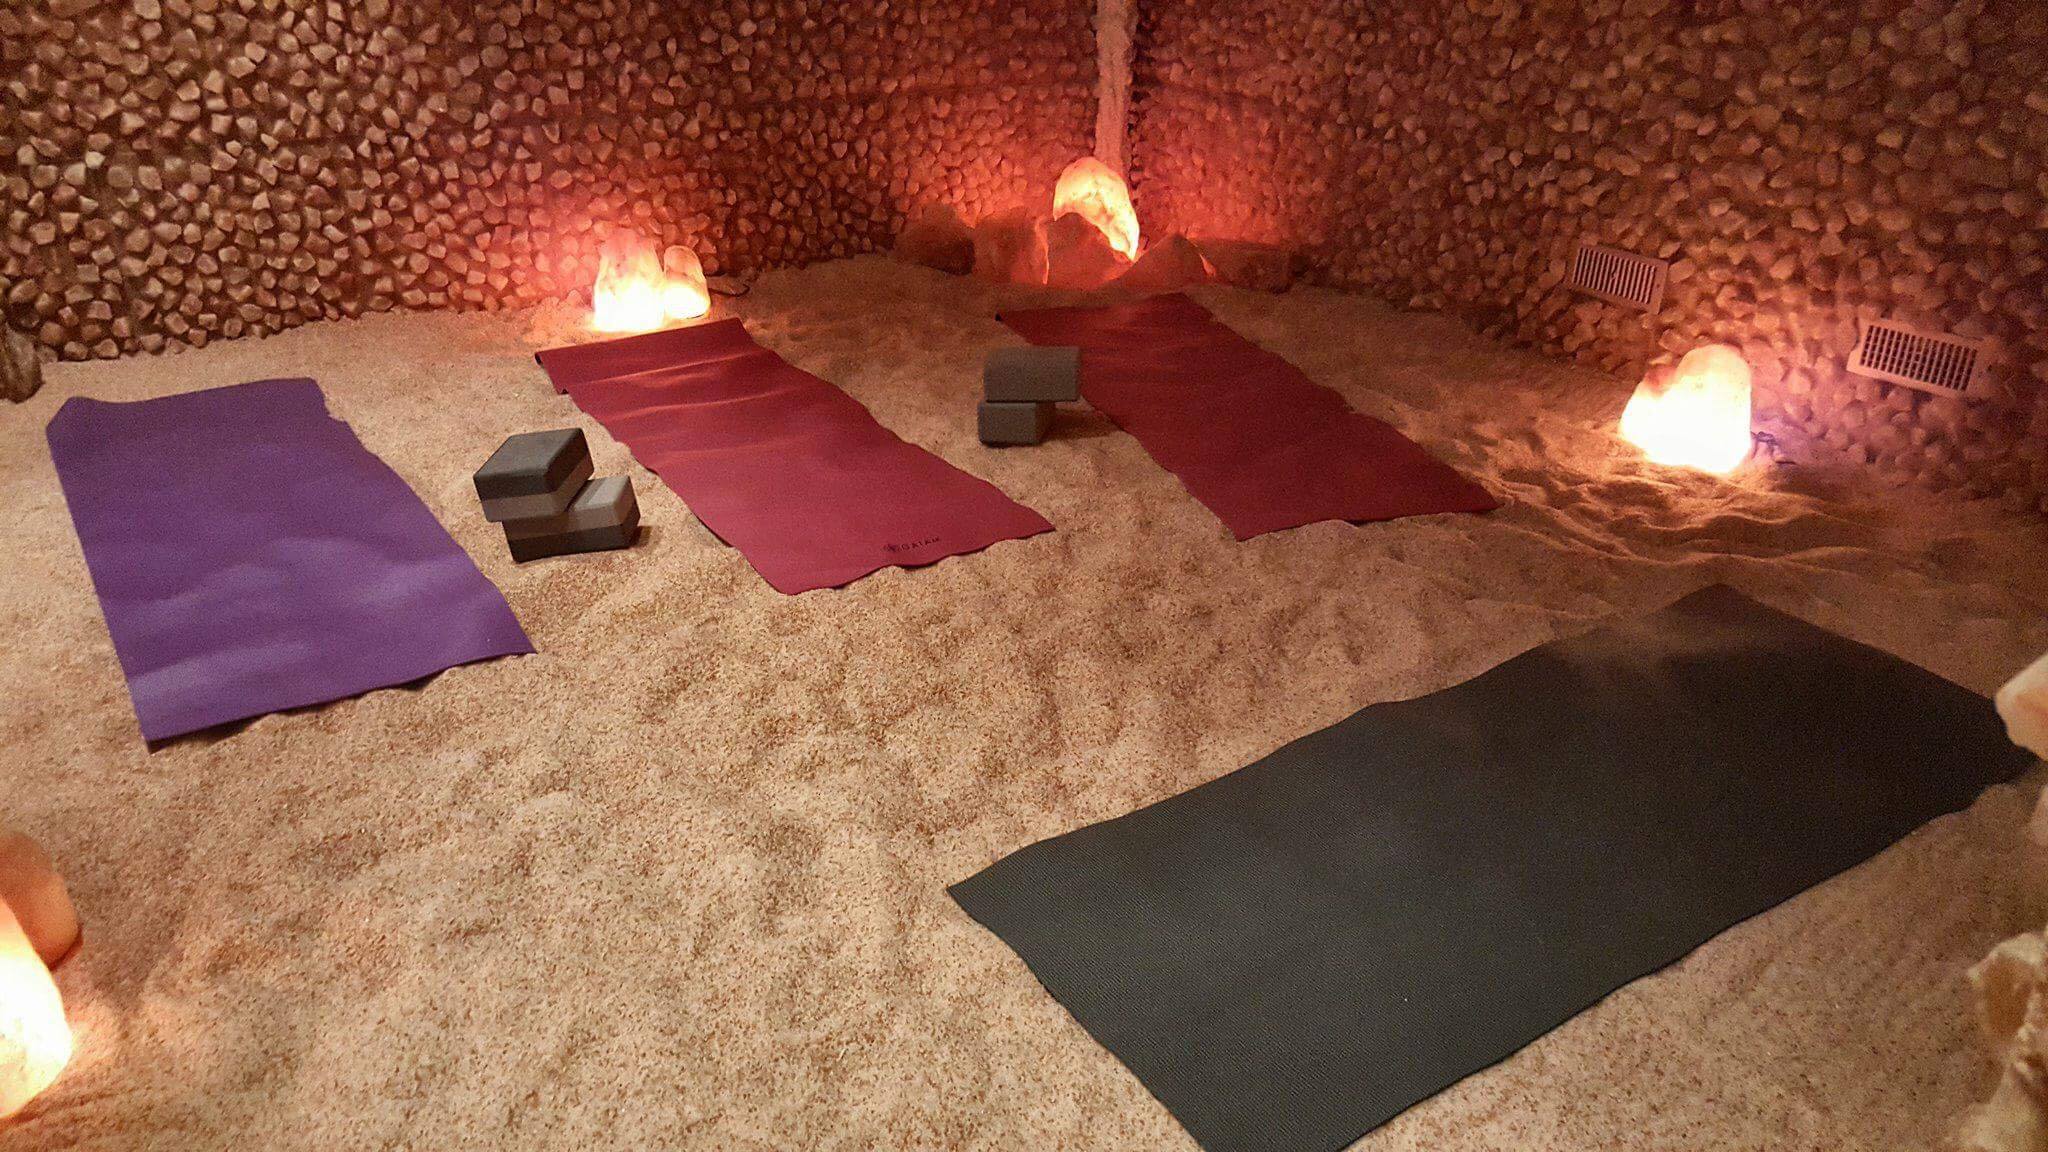 Four Yoga Mats On A Salt-Covered Floor With Lighted Himalayan Salt Stone Surrounded By Salt Brick Walls.